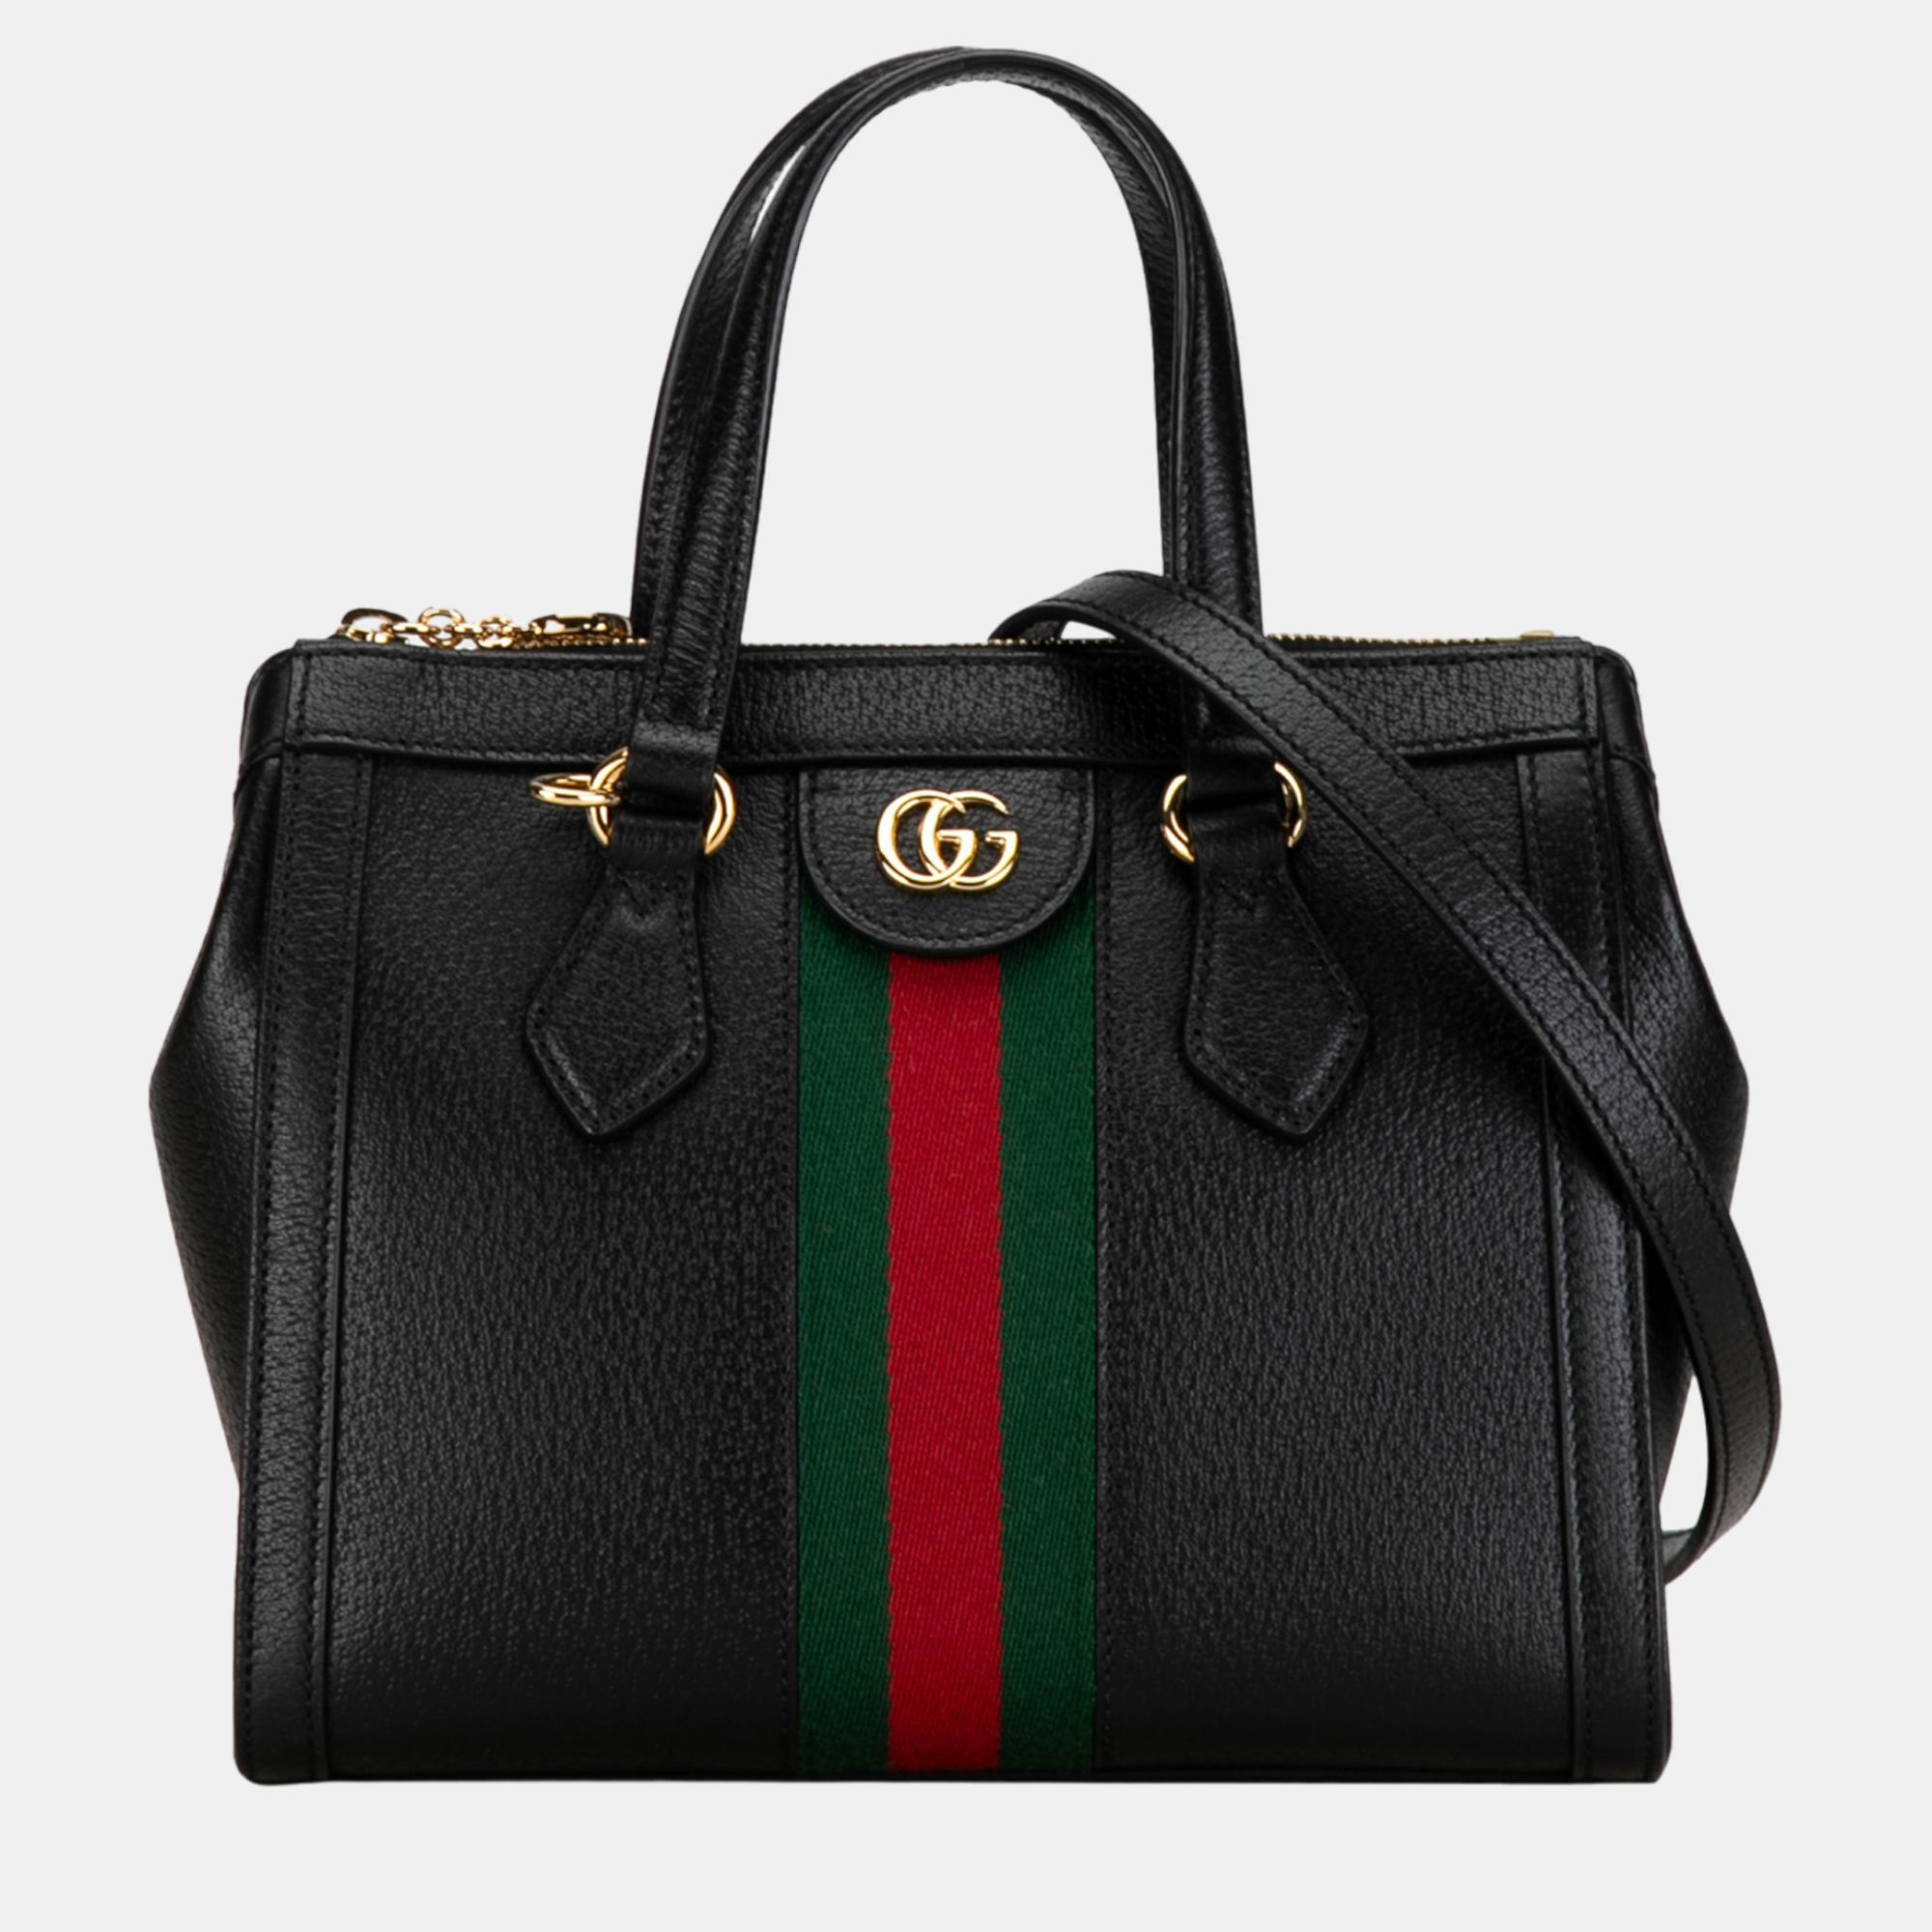 Gucci black small leather ophidia satchel